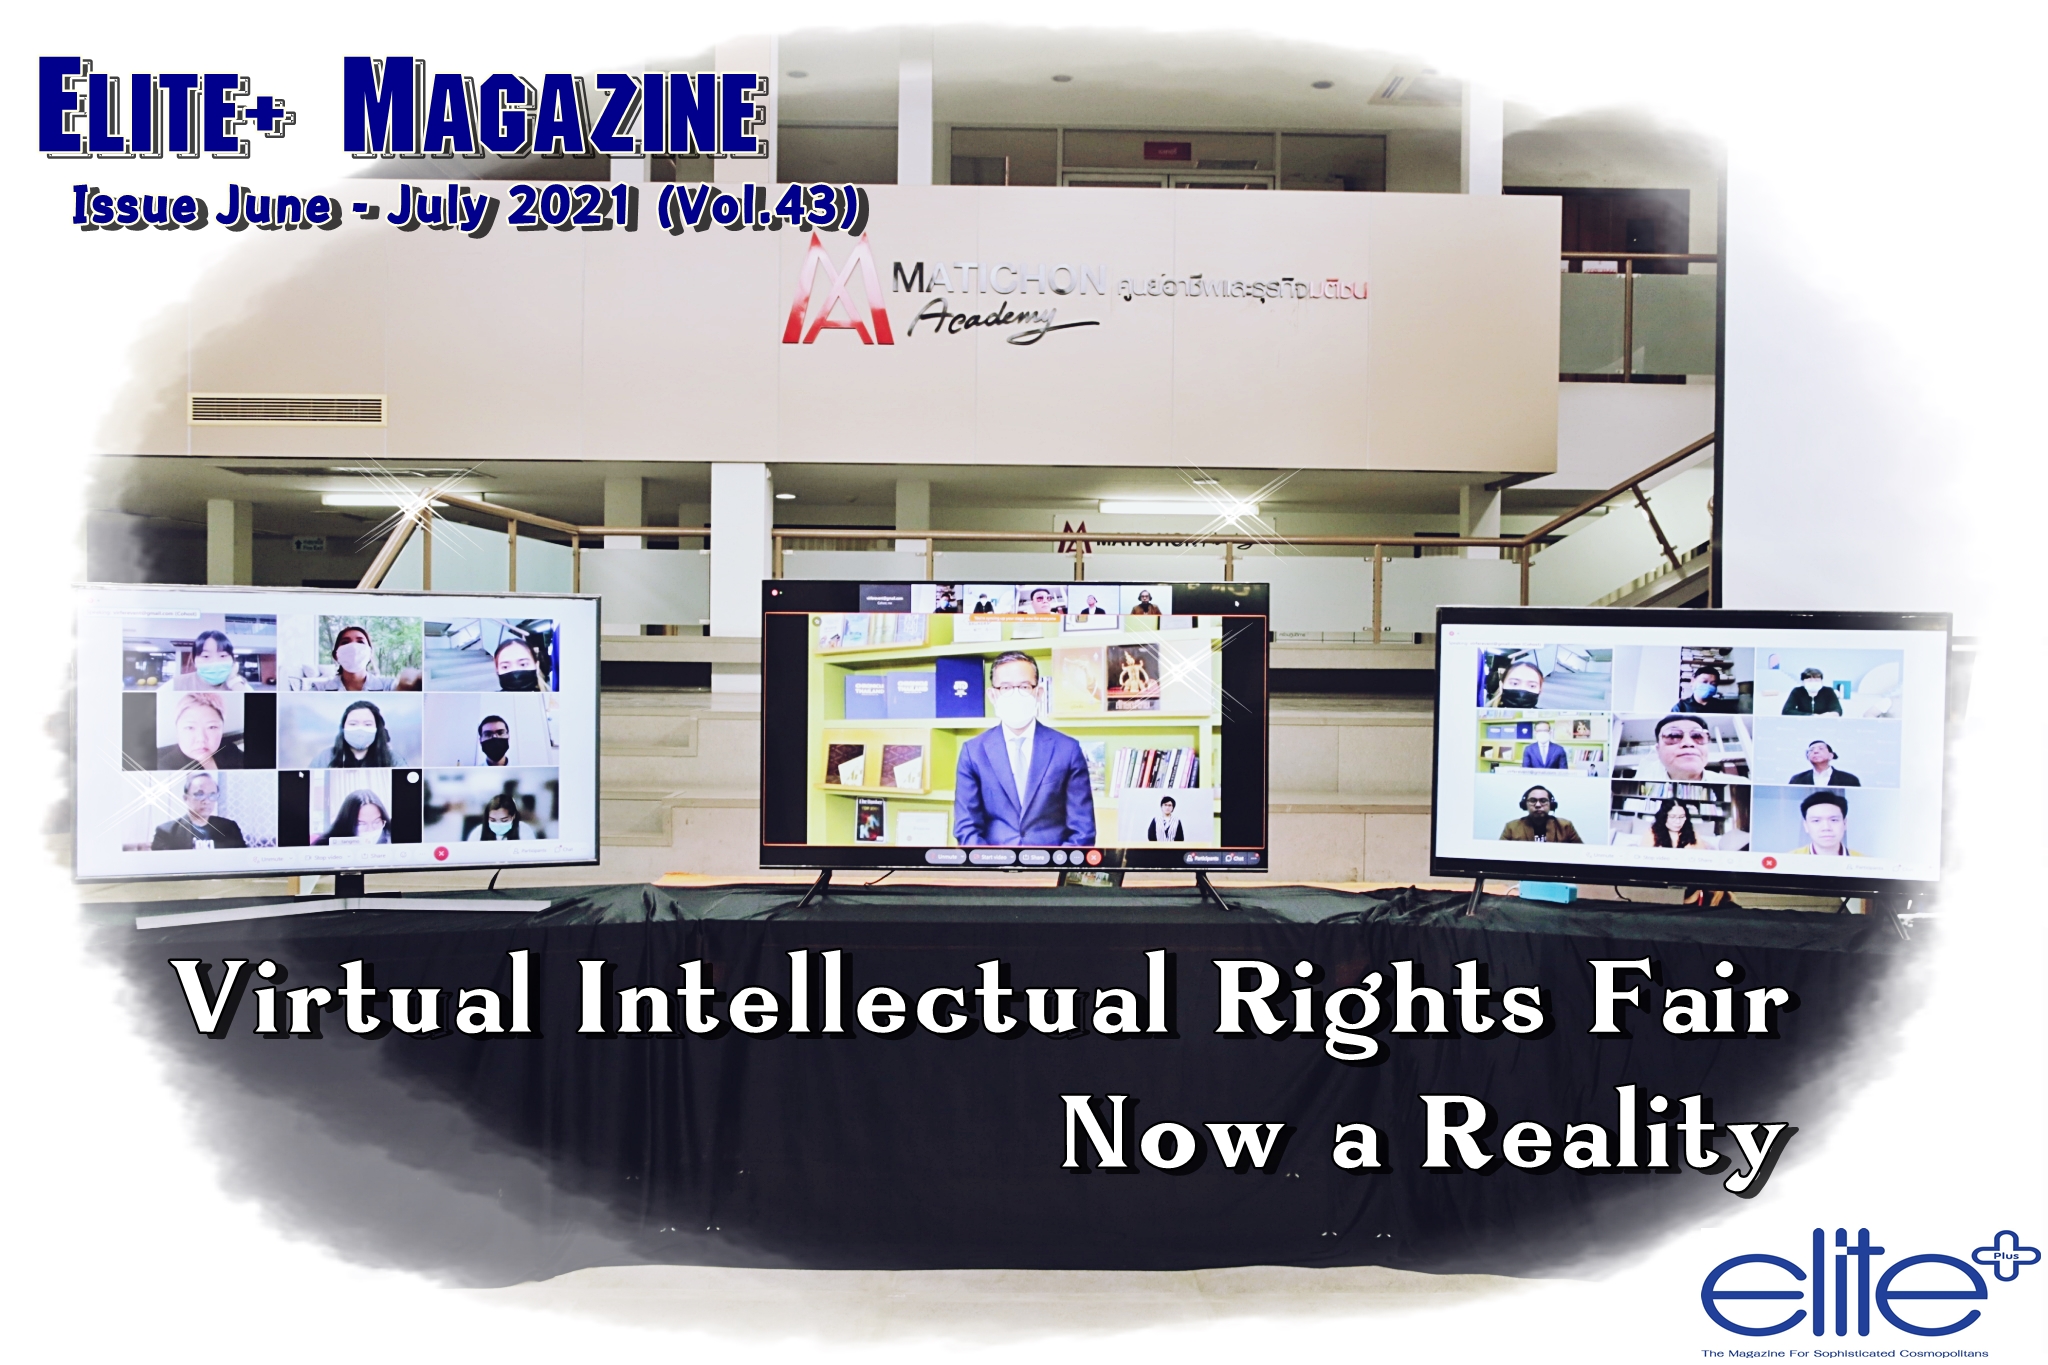 Virtual Intellectual Rights Fair Now a Reality